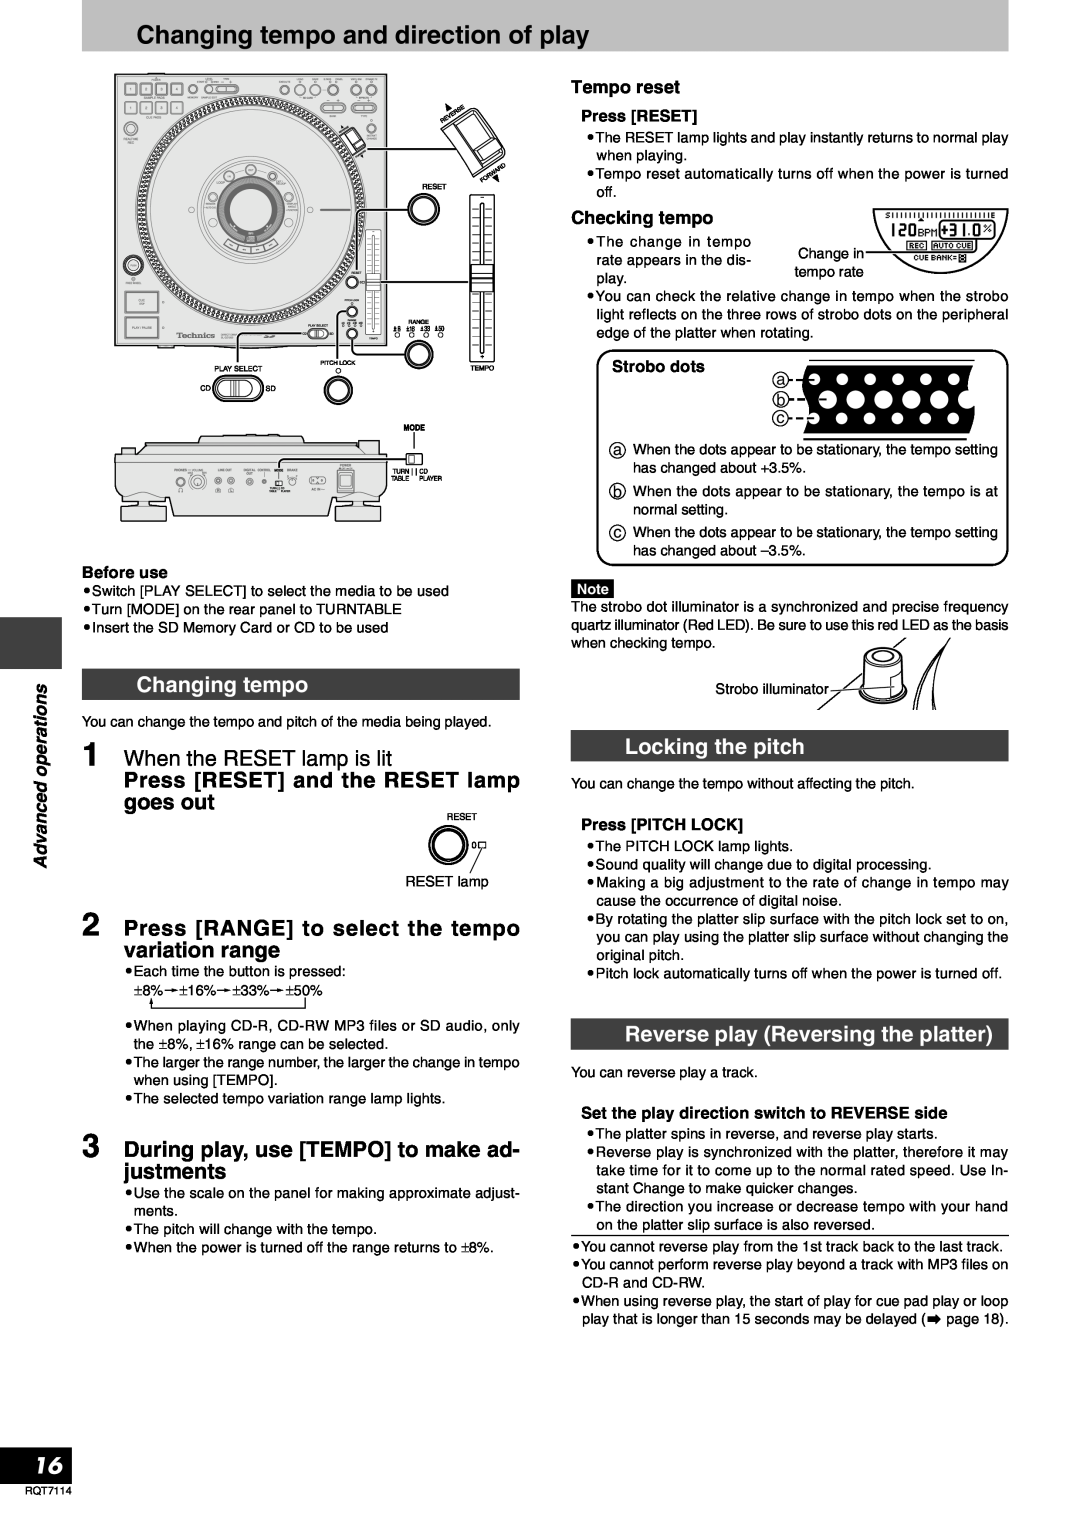 Panasonic RQT7114-2Y Changing tempo and direction of play, When the RESET lamp is lit, Locking the pitch, Tempo reset 